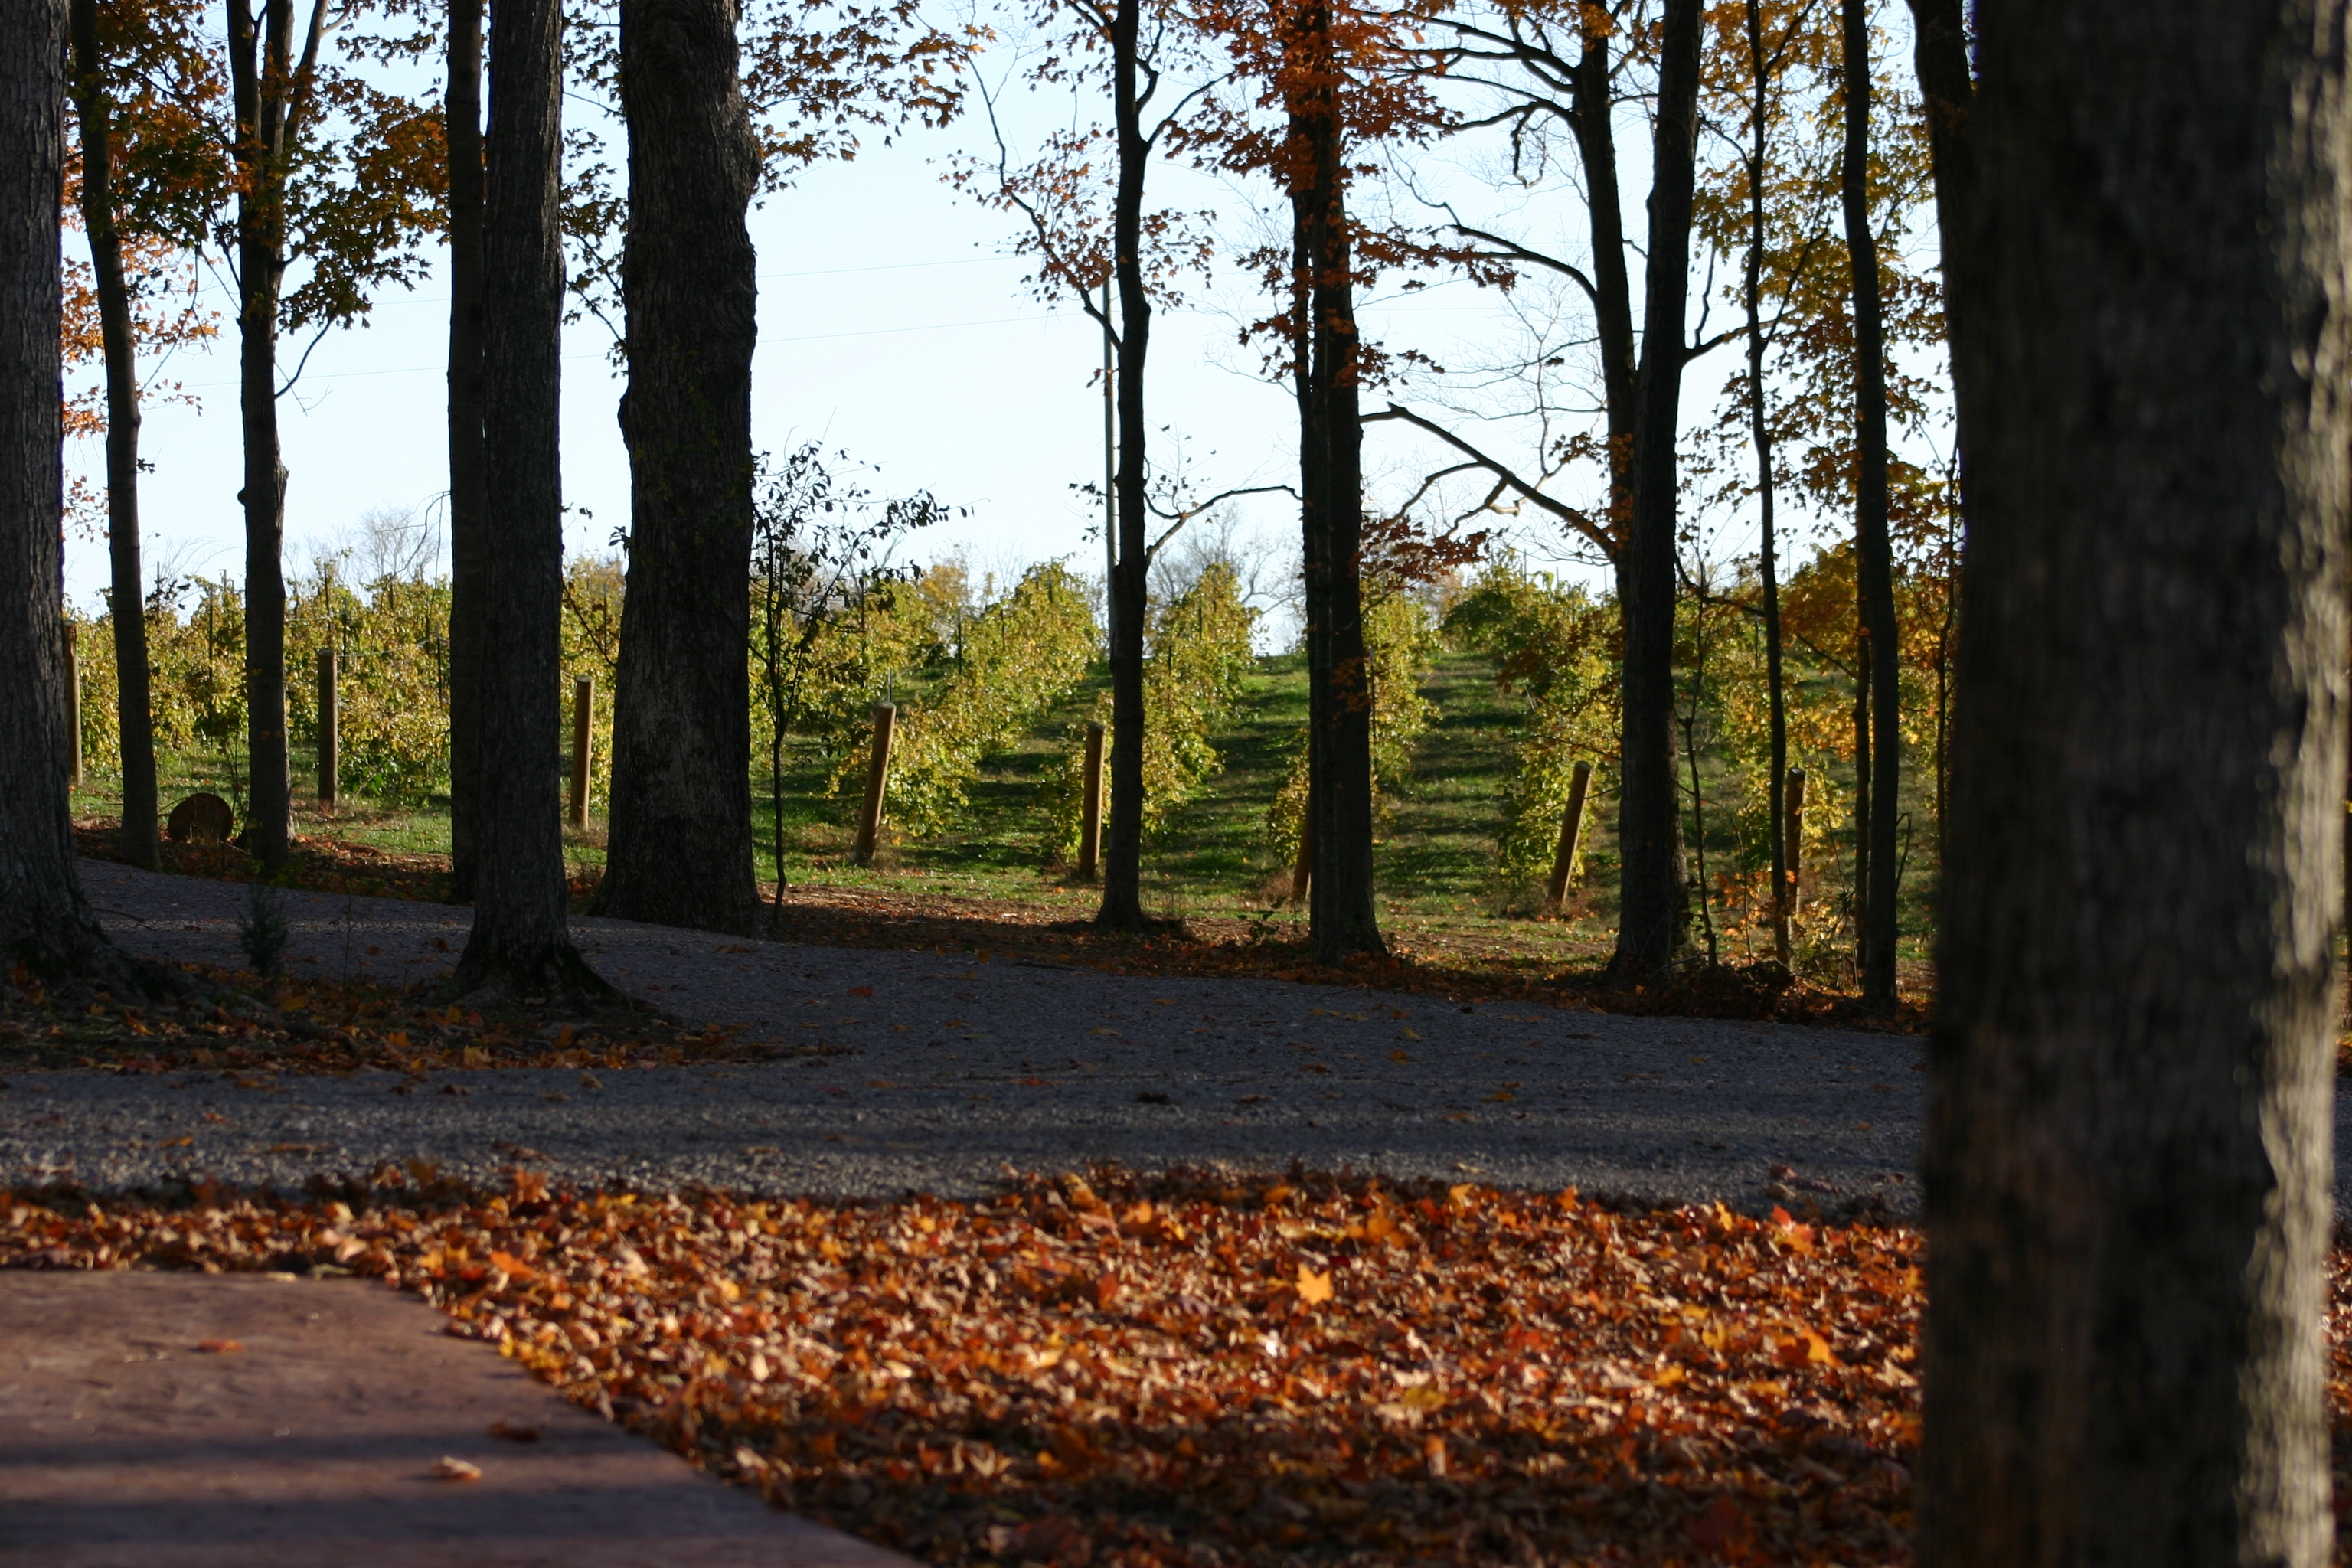 Apple Creek Vineyard & Winery - outdoor photo, daytime, of a walking path and trees with fallen leaves.